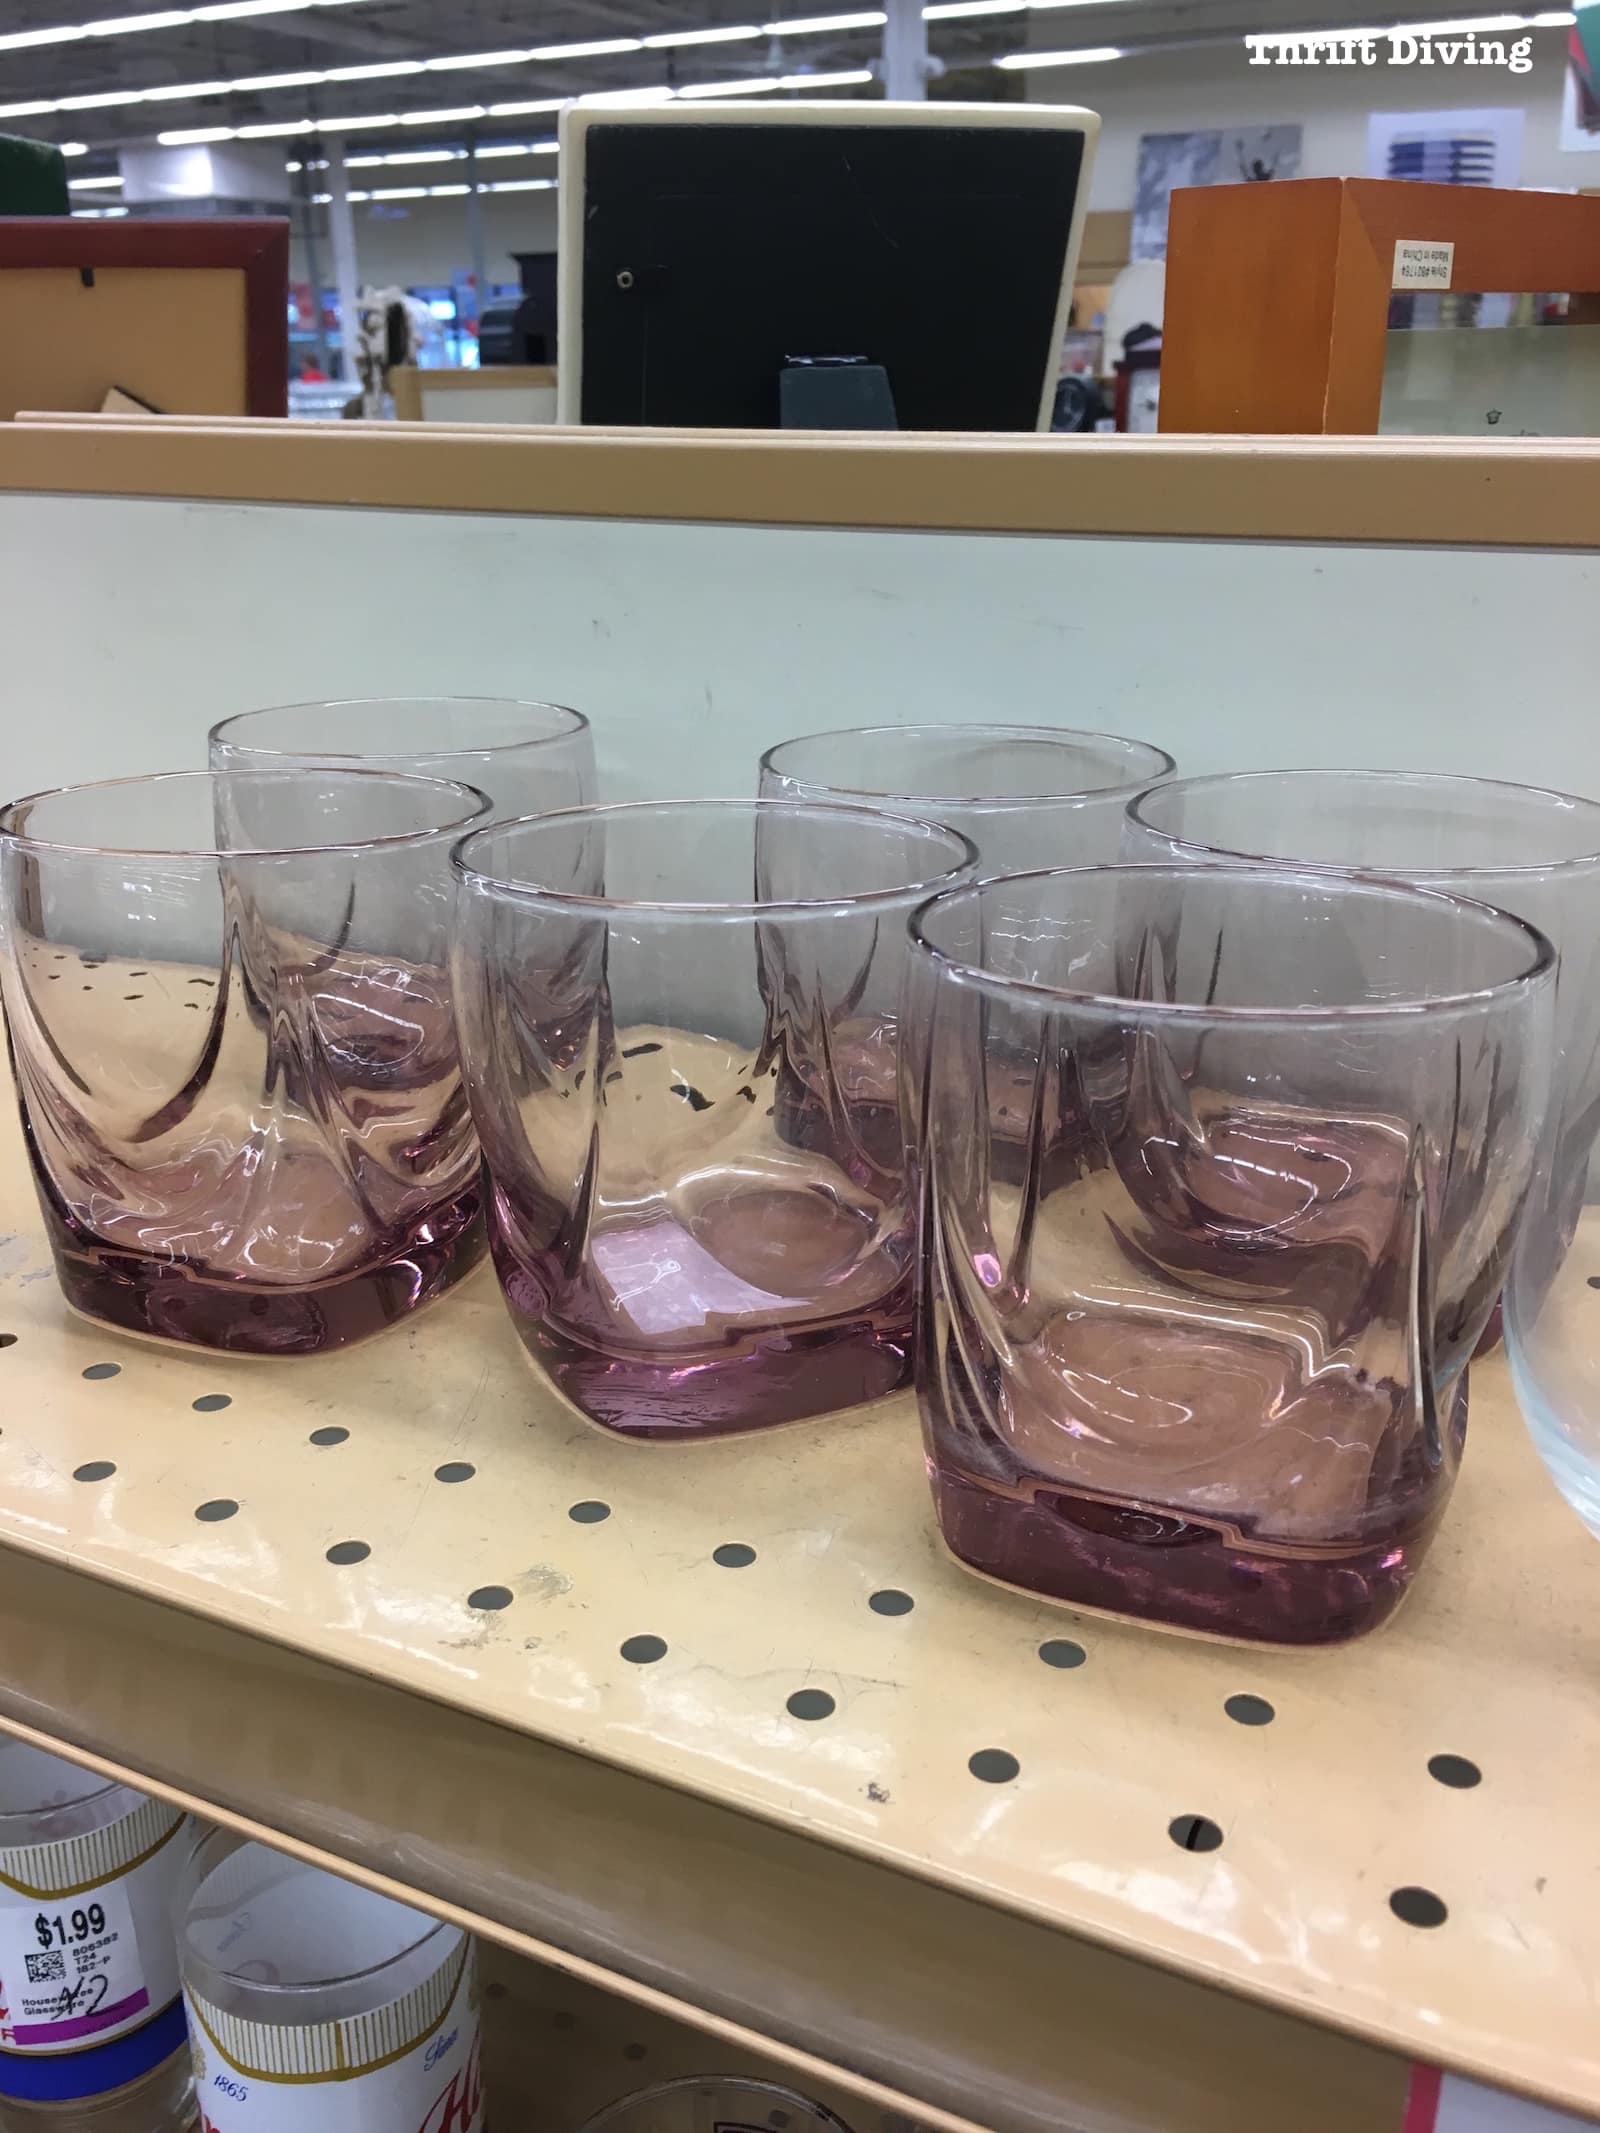 How to Shop Thrift Stores - Pink glassware - Thrift Diving